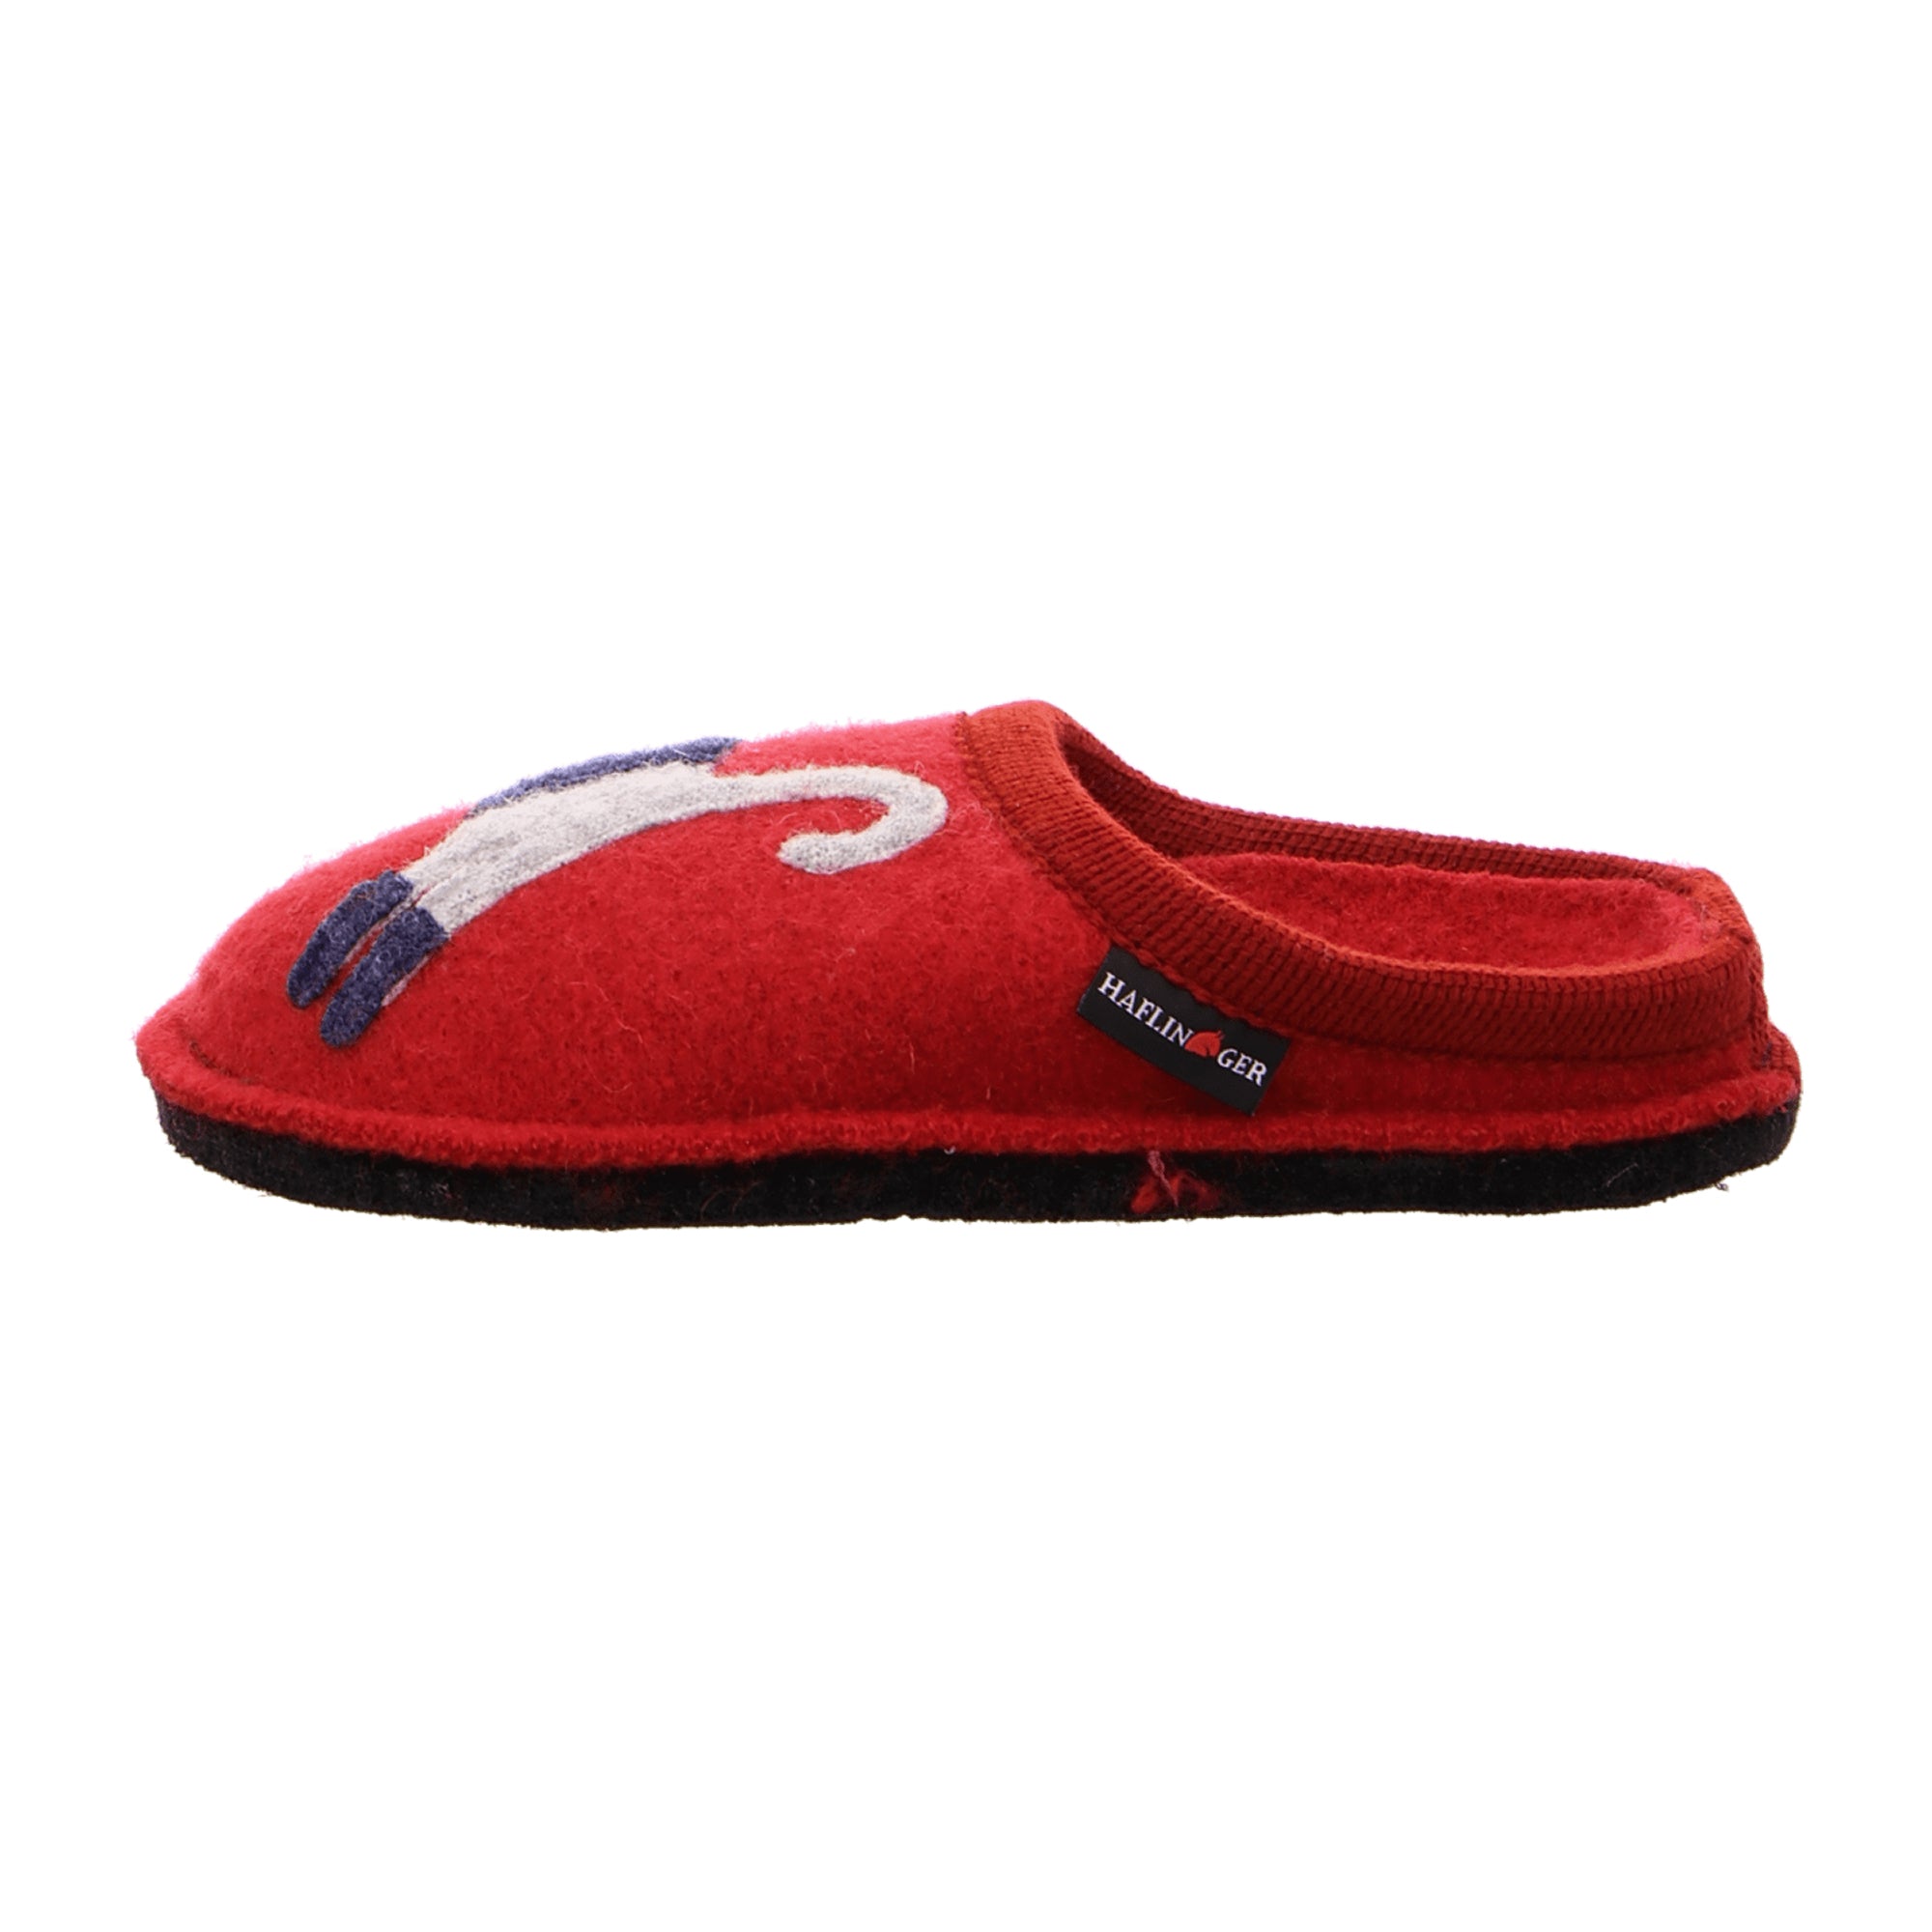 Haflinger Flair Women's Red Slippers - Comfortable & Stylish Footwear